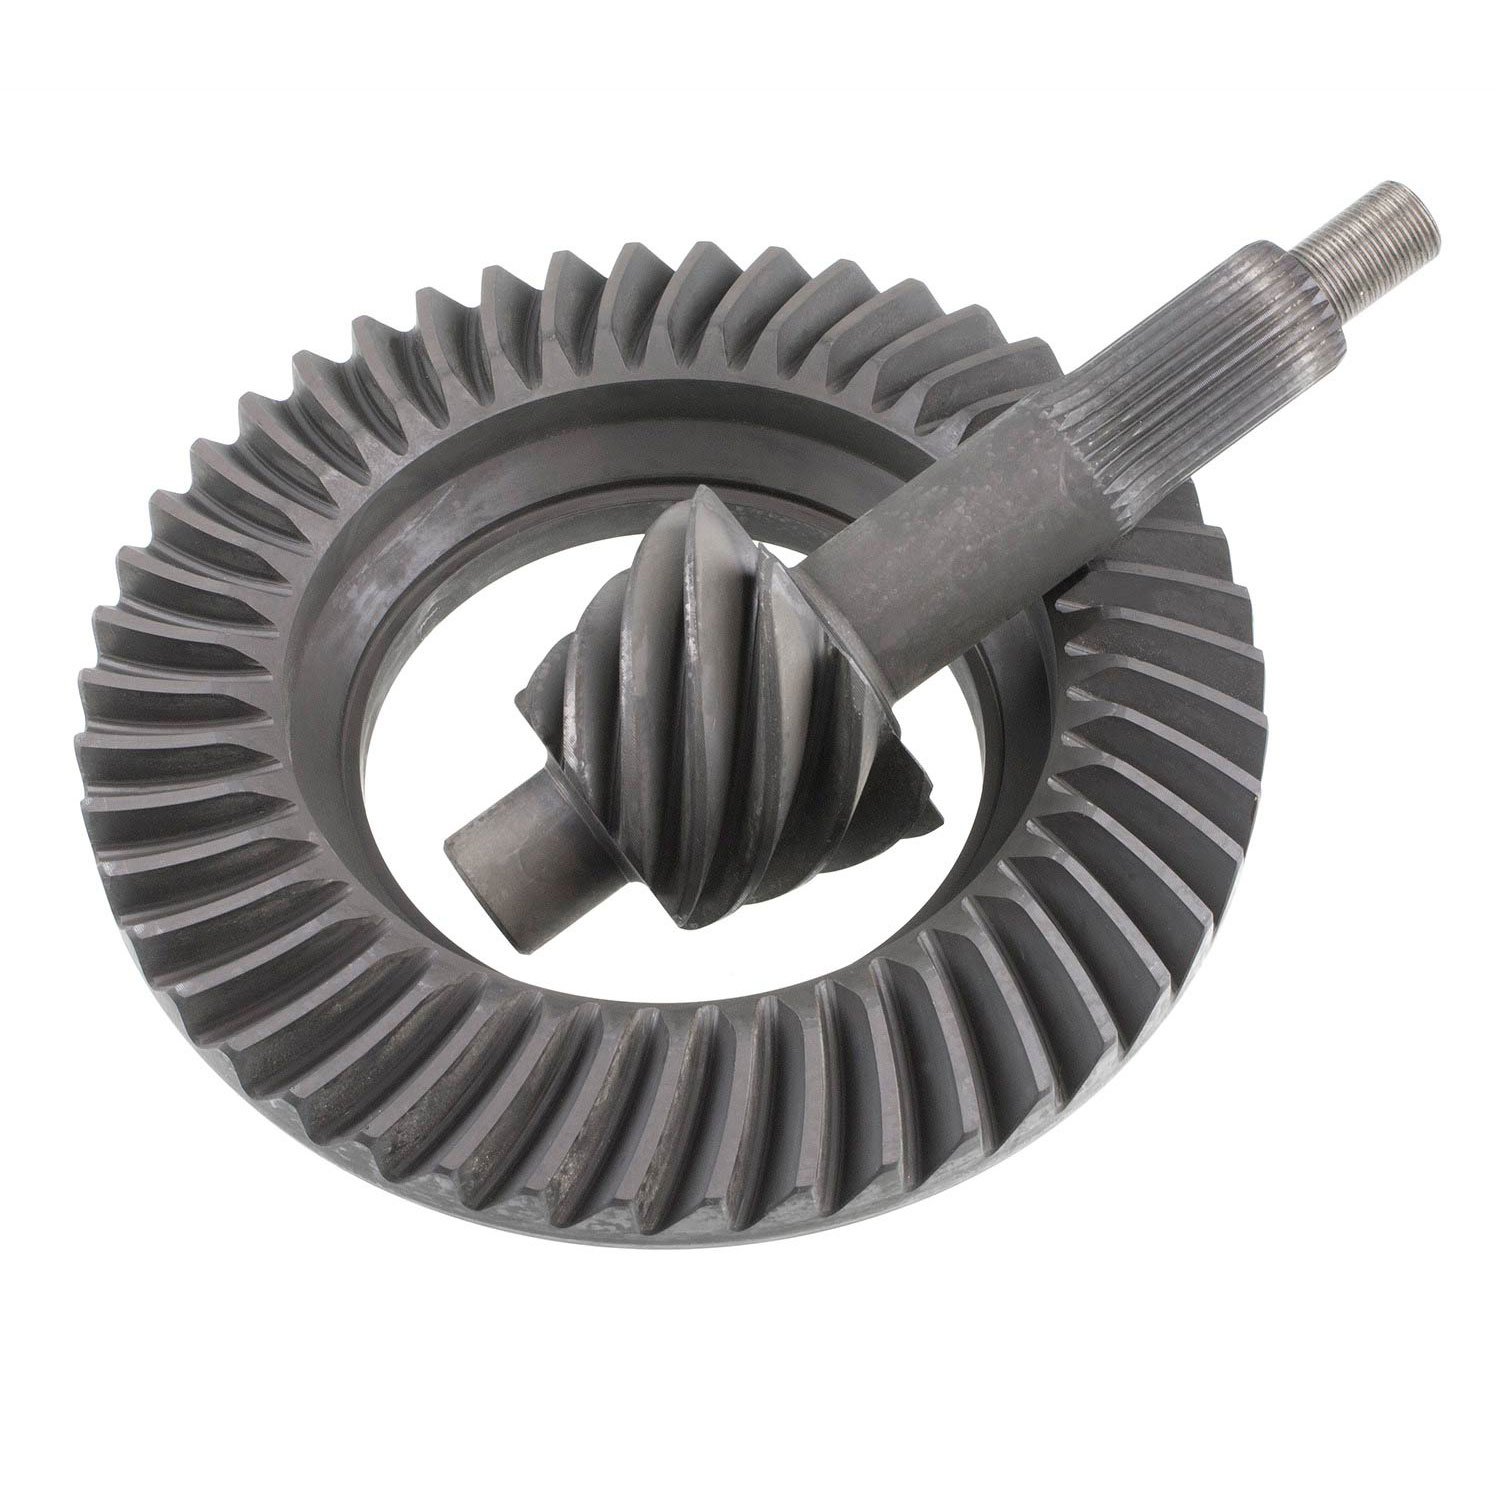 Lightened Pro Gear; Ring and Pinion Set; Fits Ford 9 in.; 5.11 Ratio; 46-9 Teeth; 1 7/8 in. Stem Siz